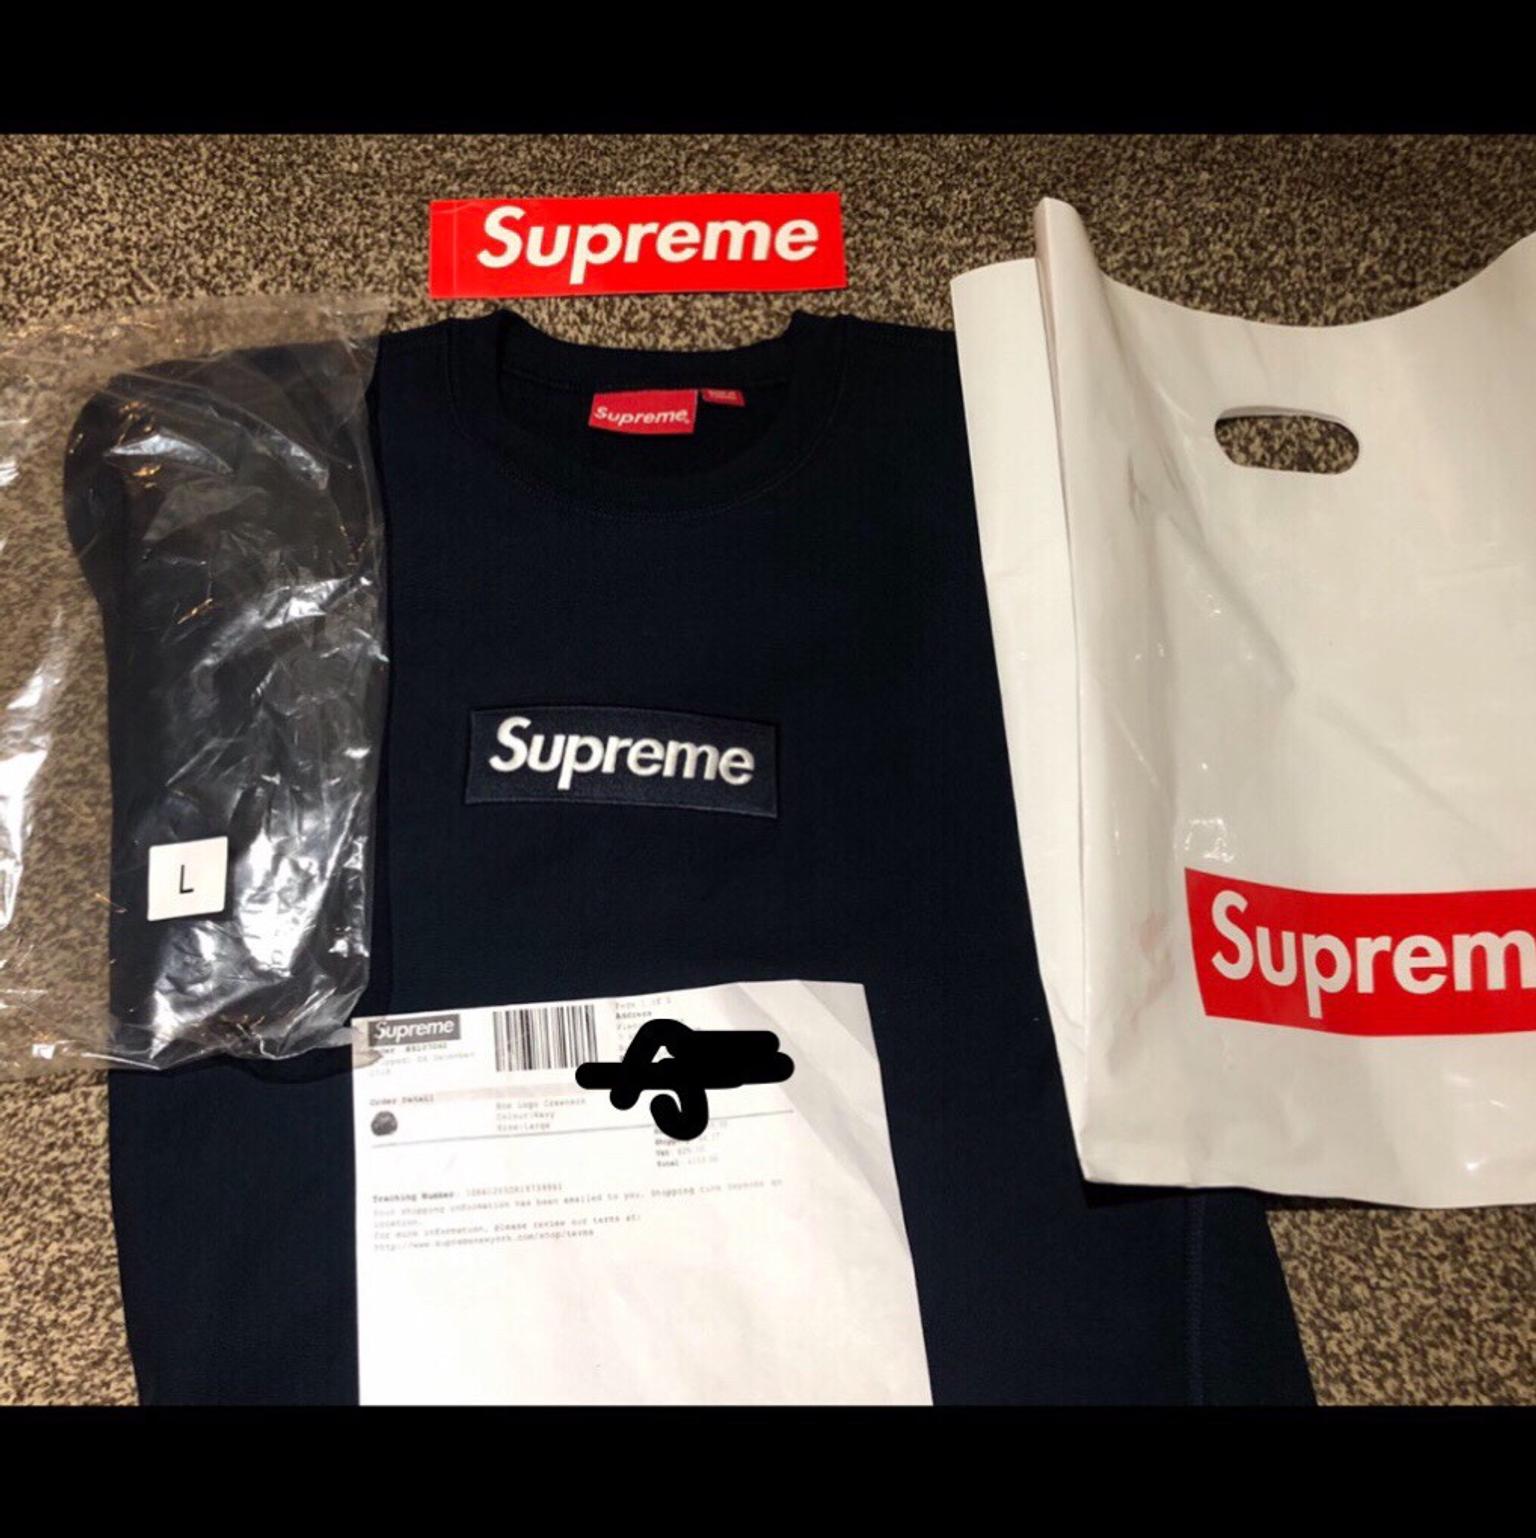 Supreme Navy Box Logo Crewneck Fw18 Large in B90 Solihull for £380.00